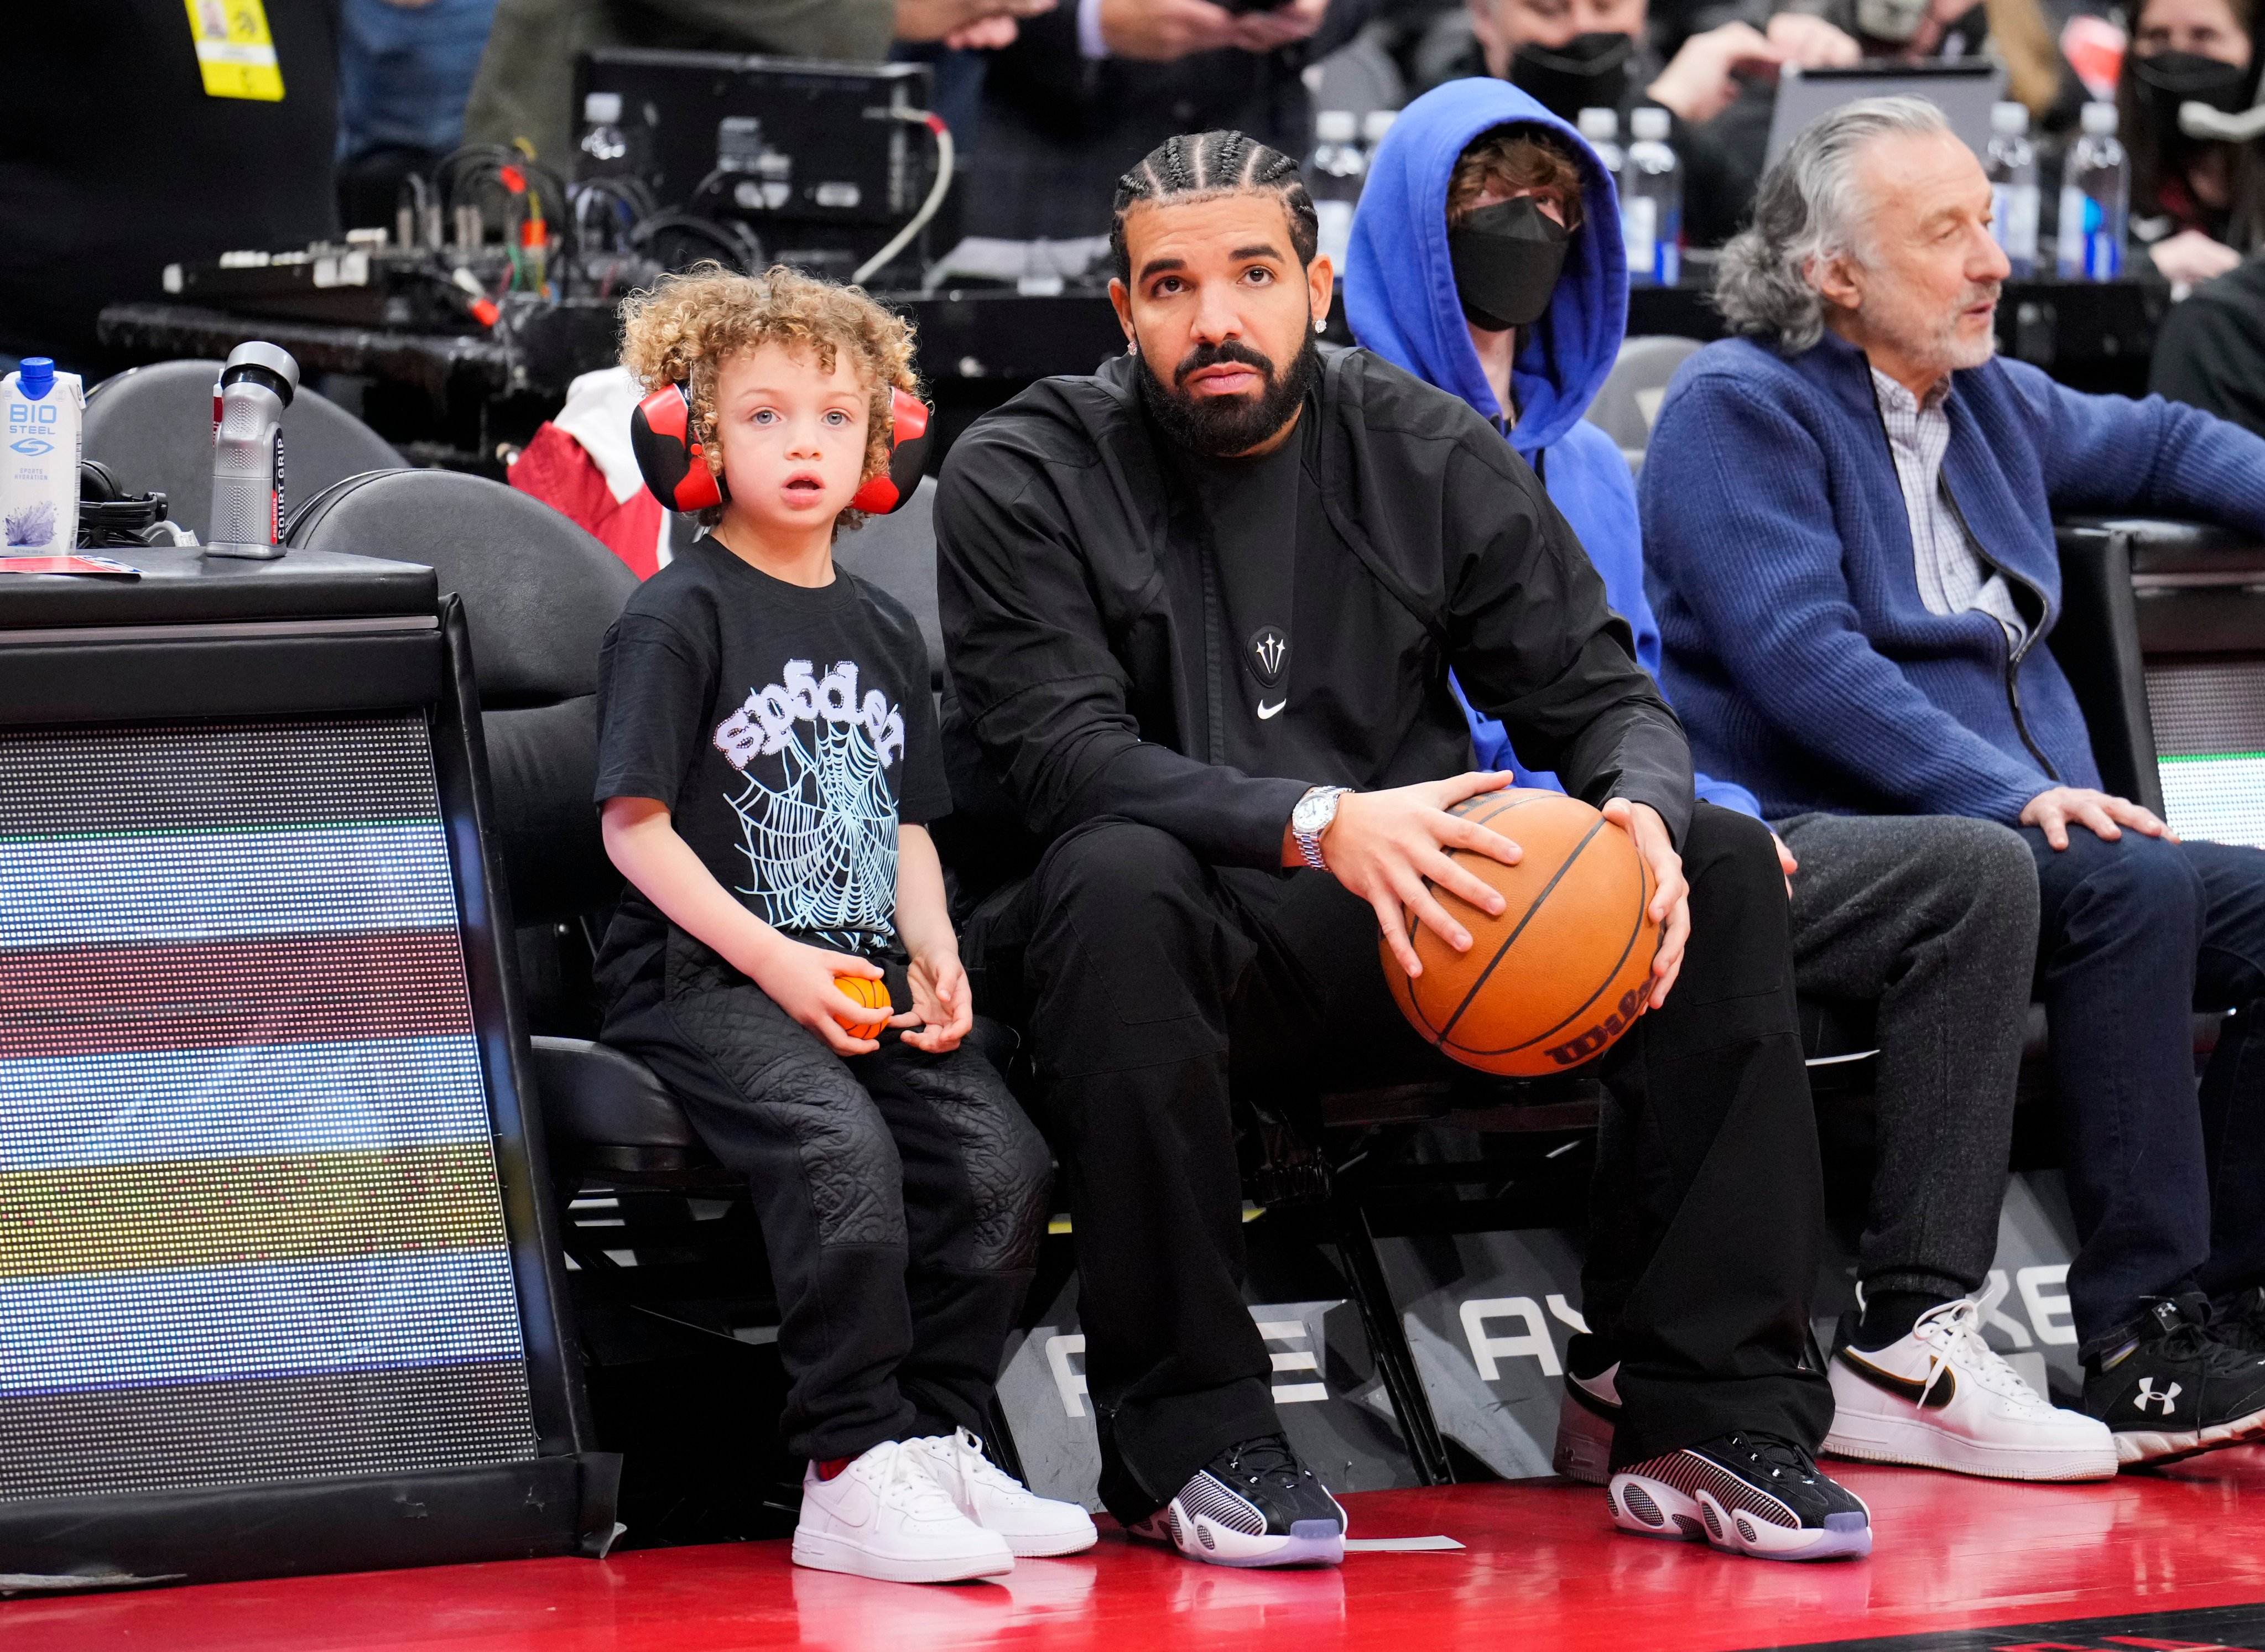 We already knew Drake’s son Adonis was a basketball lover like his dad – now it seems he’s following in his musical footsteps too. Photo: Getty